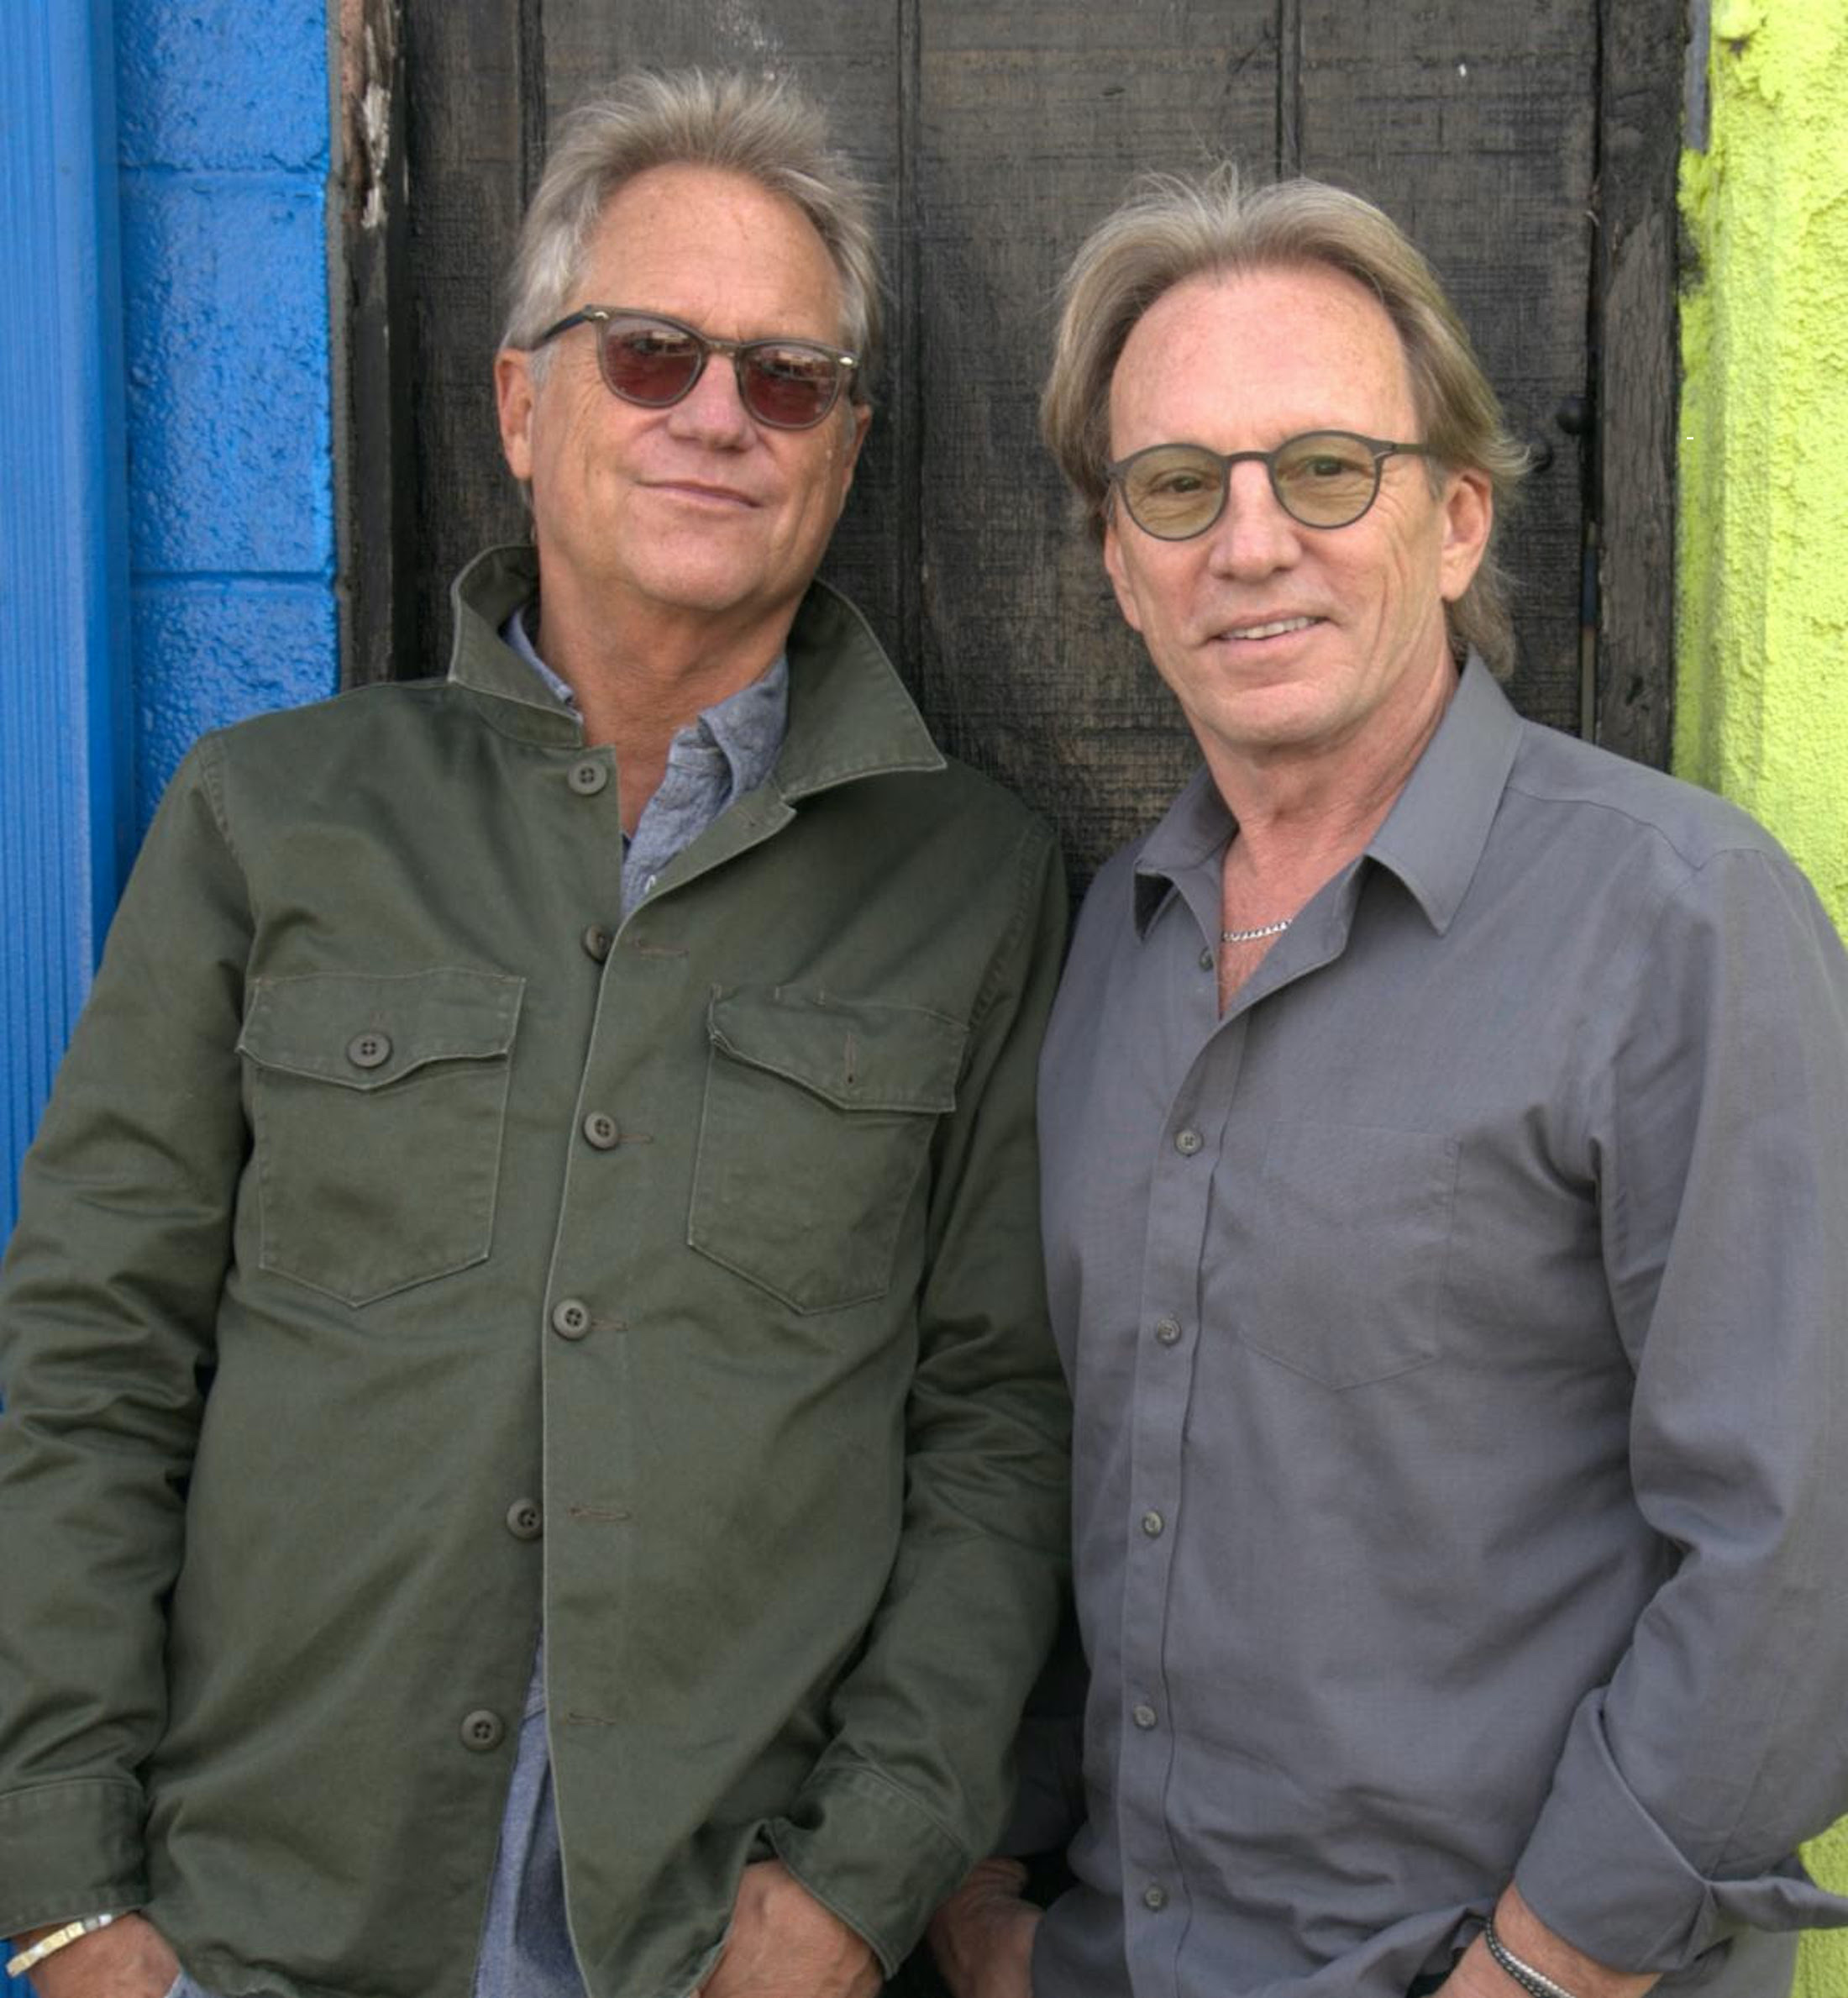 Gerry Beckley and Dewey Bunnell | Photo Credit: Henry Diltz